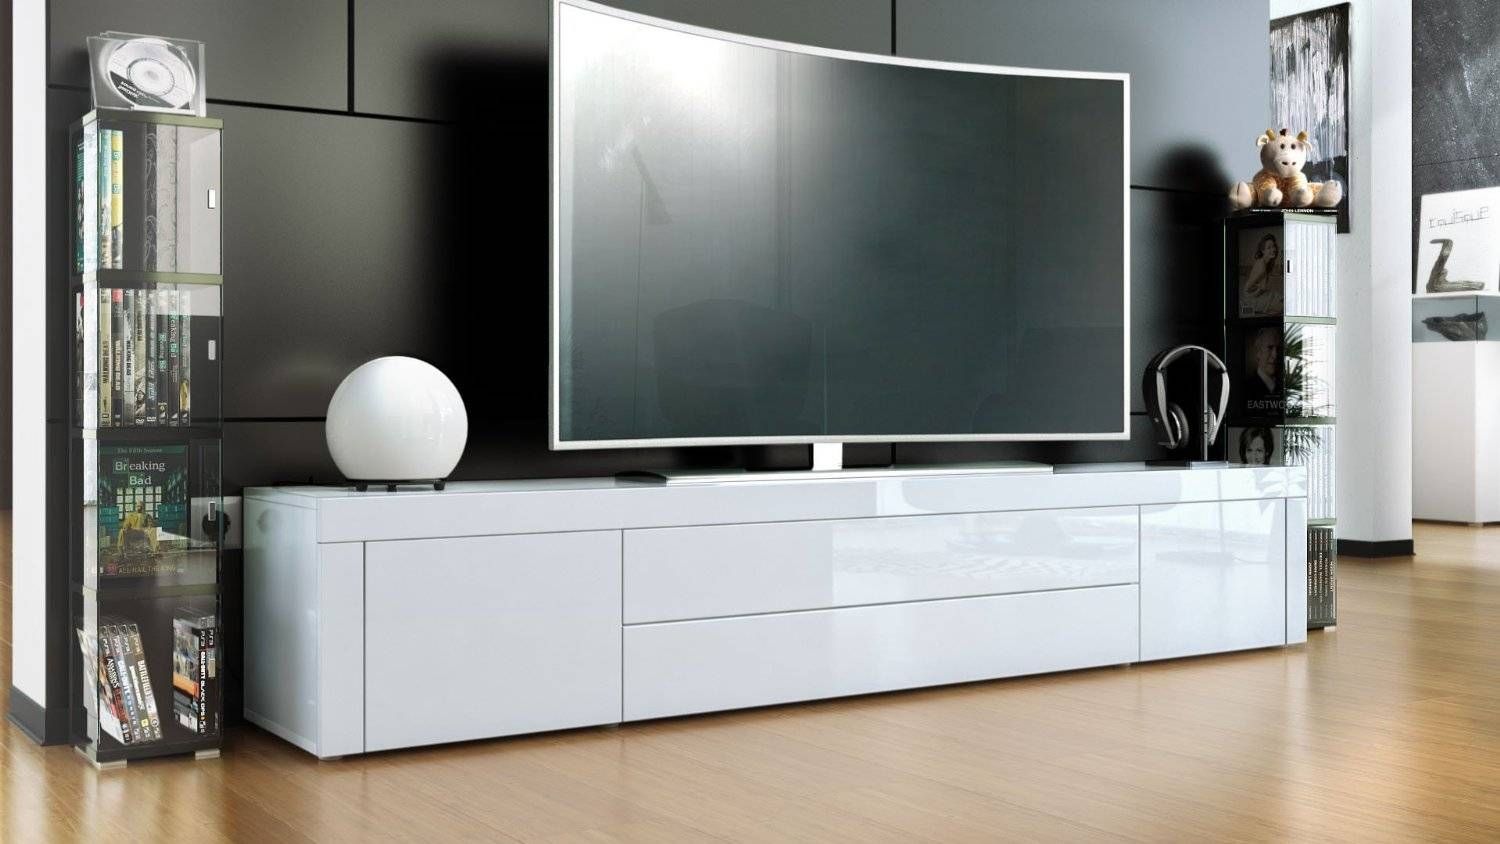 Unique High Gloss Tv Unit Sale 21 In Home Decoration Ideas With Throughout High Gloss Tv Cabinets (View 11 of 15)